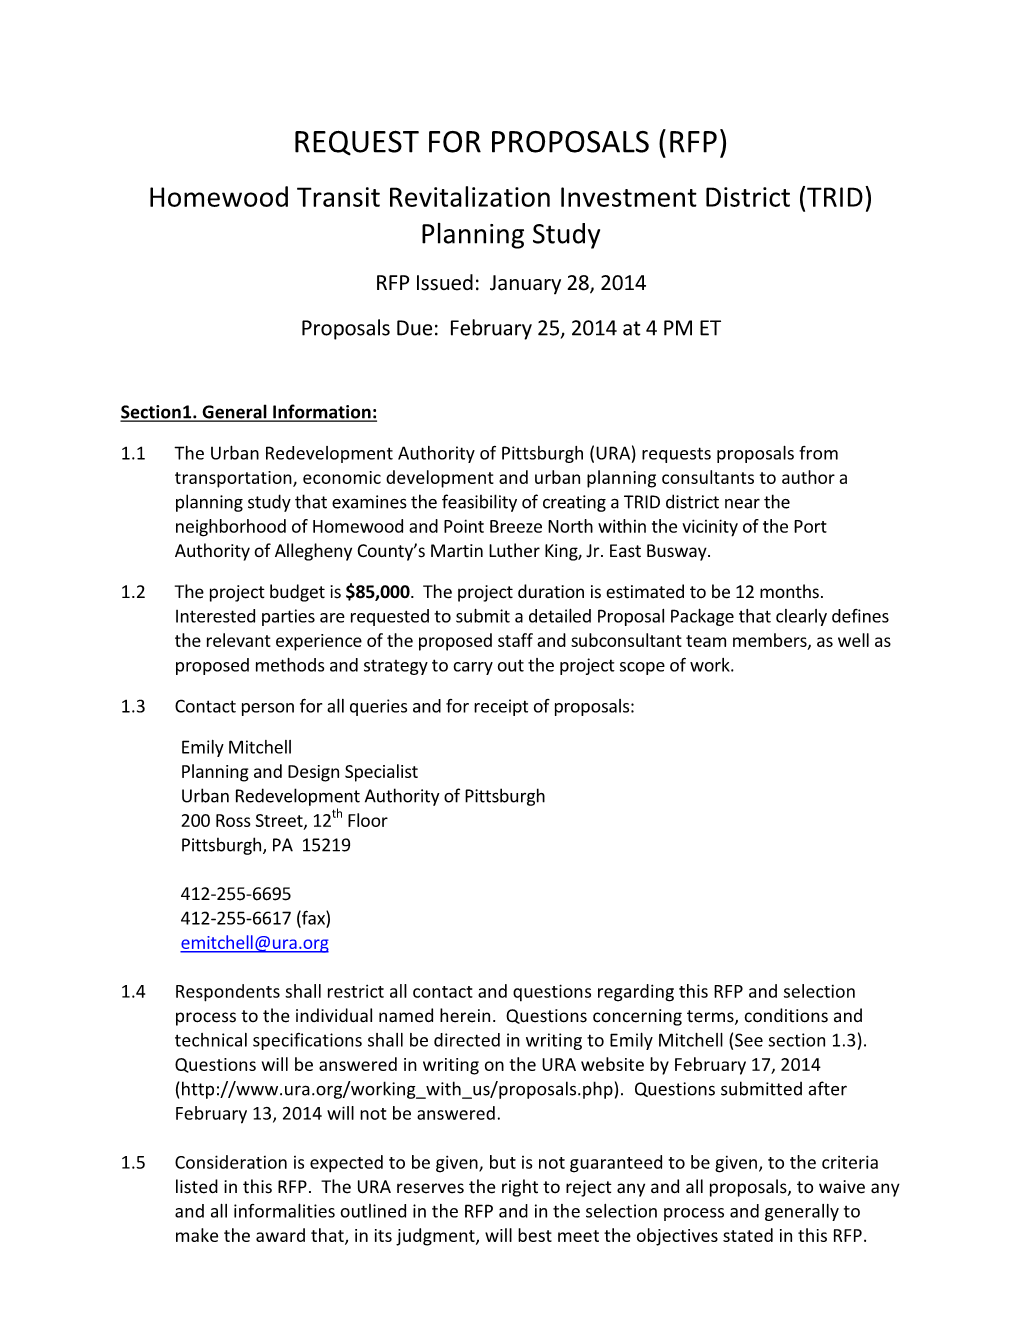 RFP) Homewood Transit Revitalization Investment District (TRID) Planning Study RFP Issued: January 28, 2014 Proposals Due: February 25, 2014 at 4 PM ET